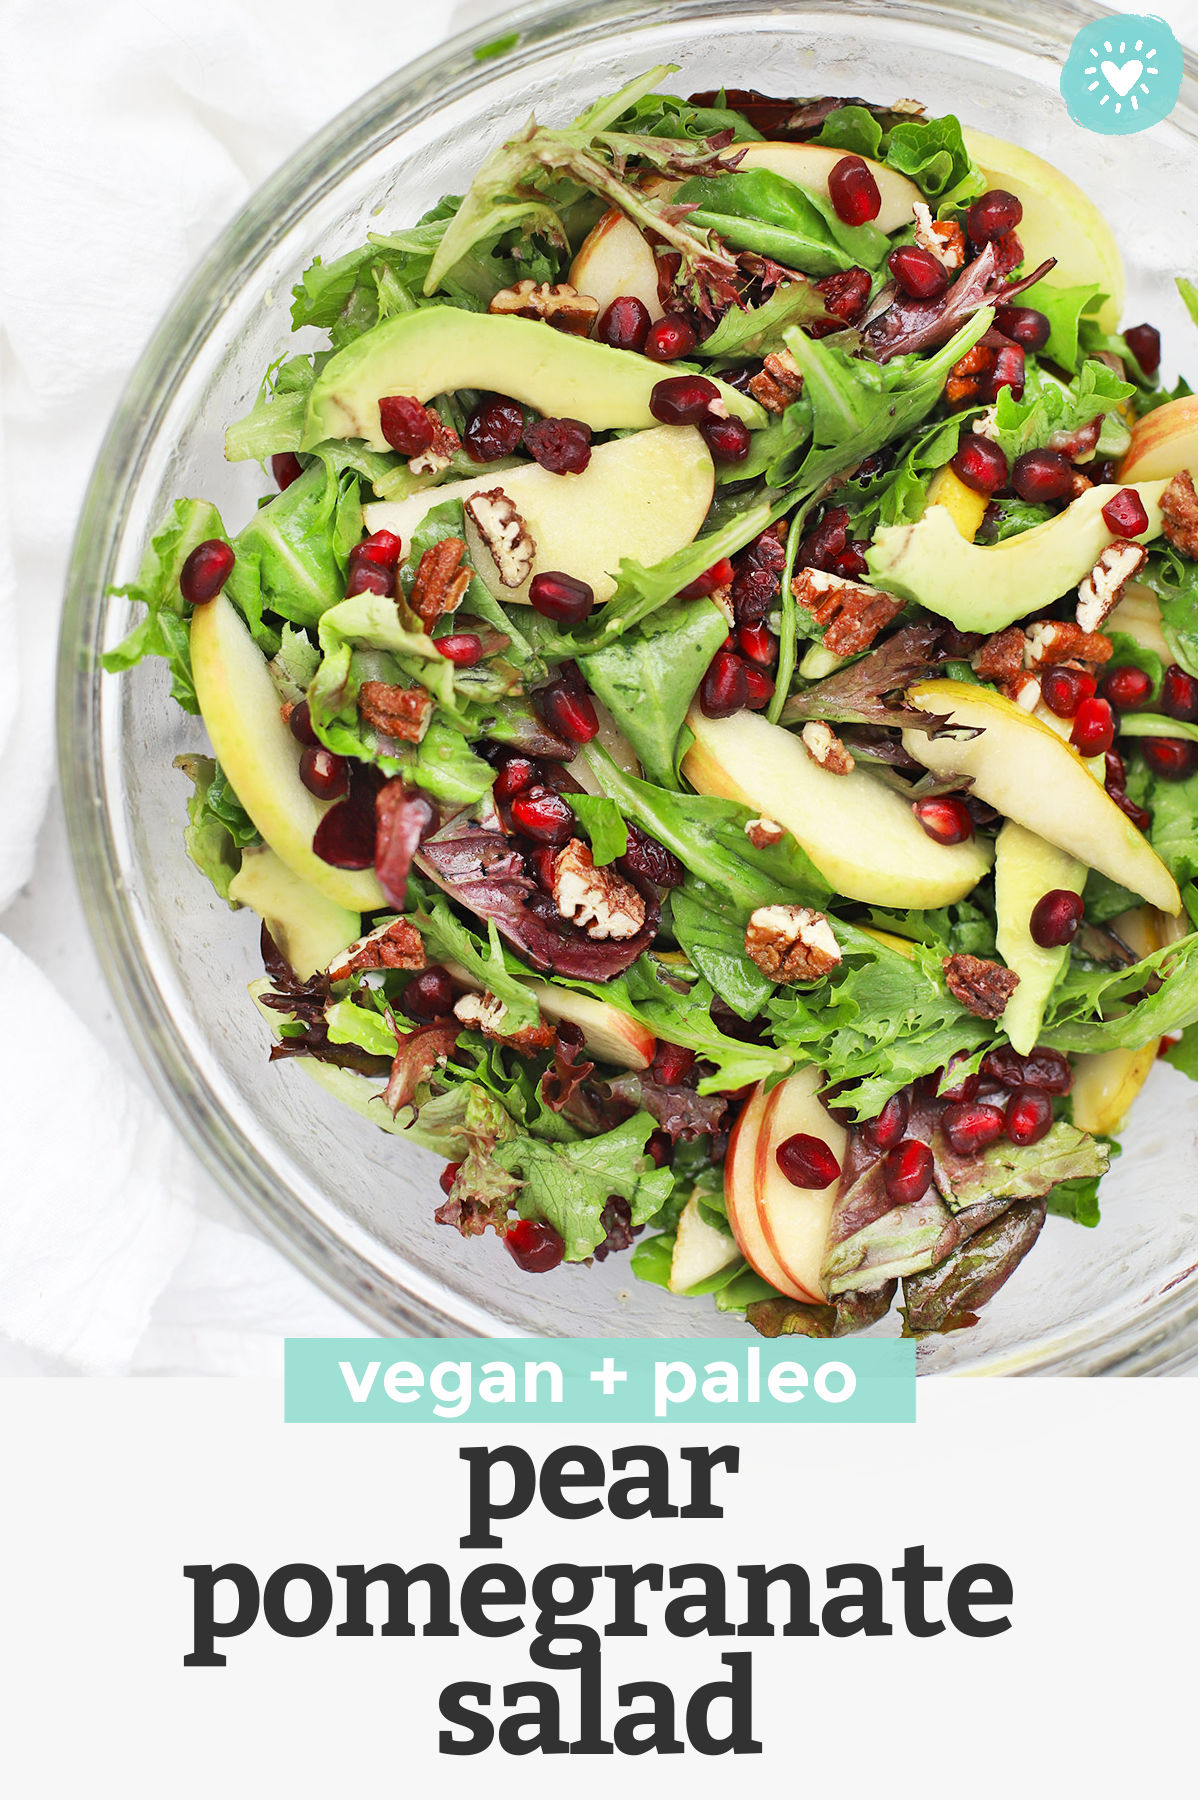 Pear Pomegranate Salad  - This pear and pomegranate salad has a beautiful mix of color and flavor. You'll love the simple dressing that ties it all together! (Gluten-Free + Vegan) // Pomegranate Salad Recipe // Side Salad // Holiday salad // Christmas side dish // Thanksgiving side dish #pomegranate #salad #sidedish #sidesalad #paleo #vegan